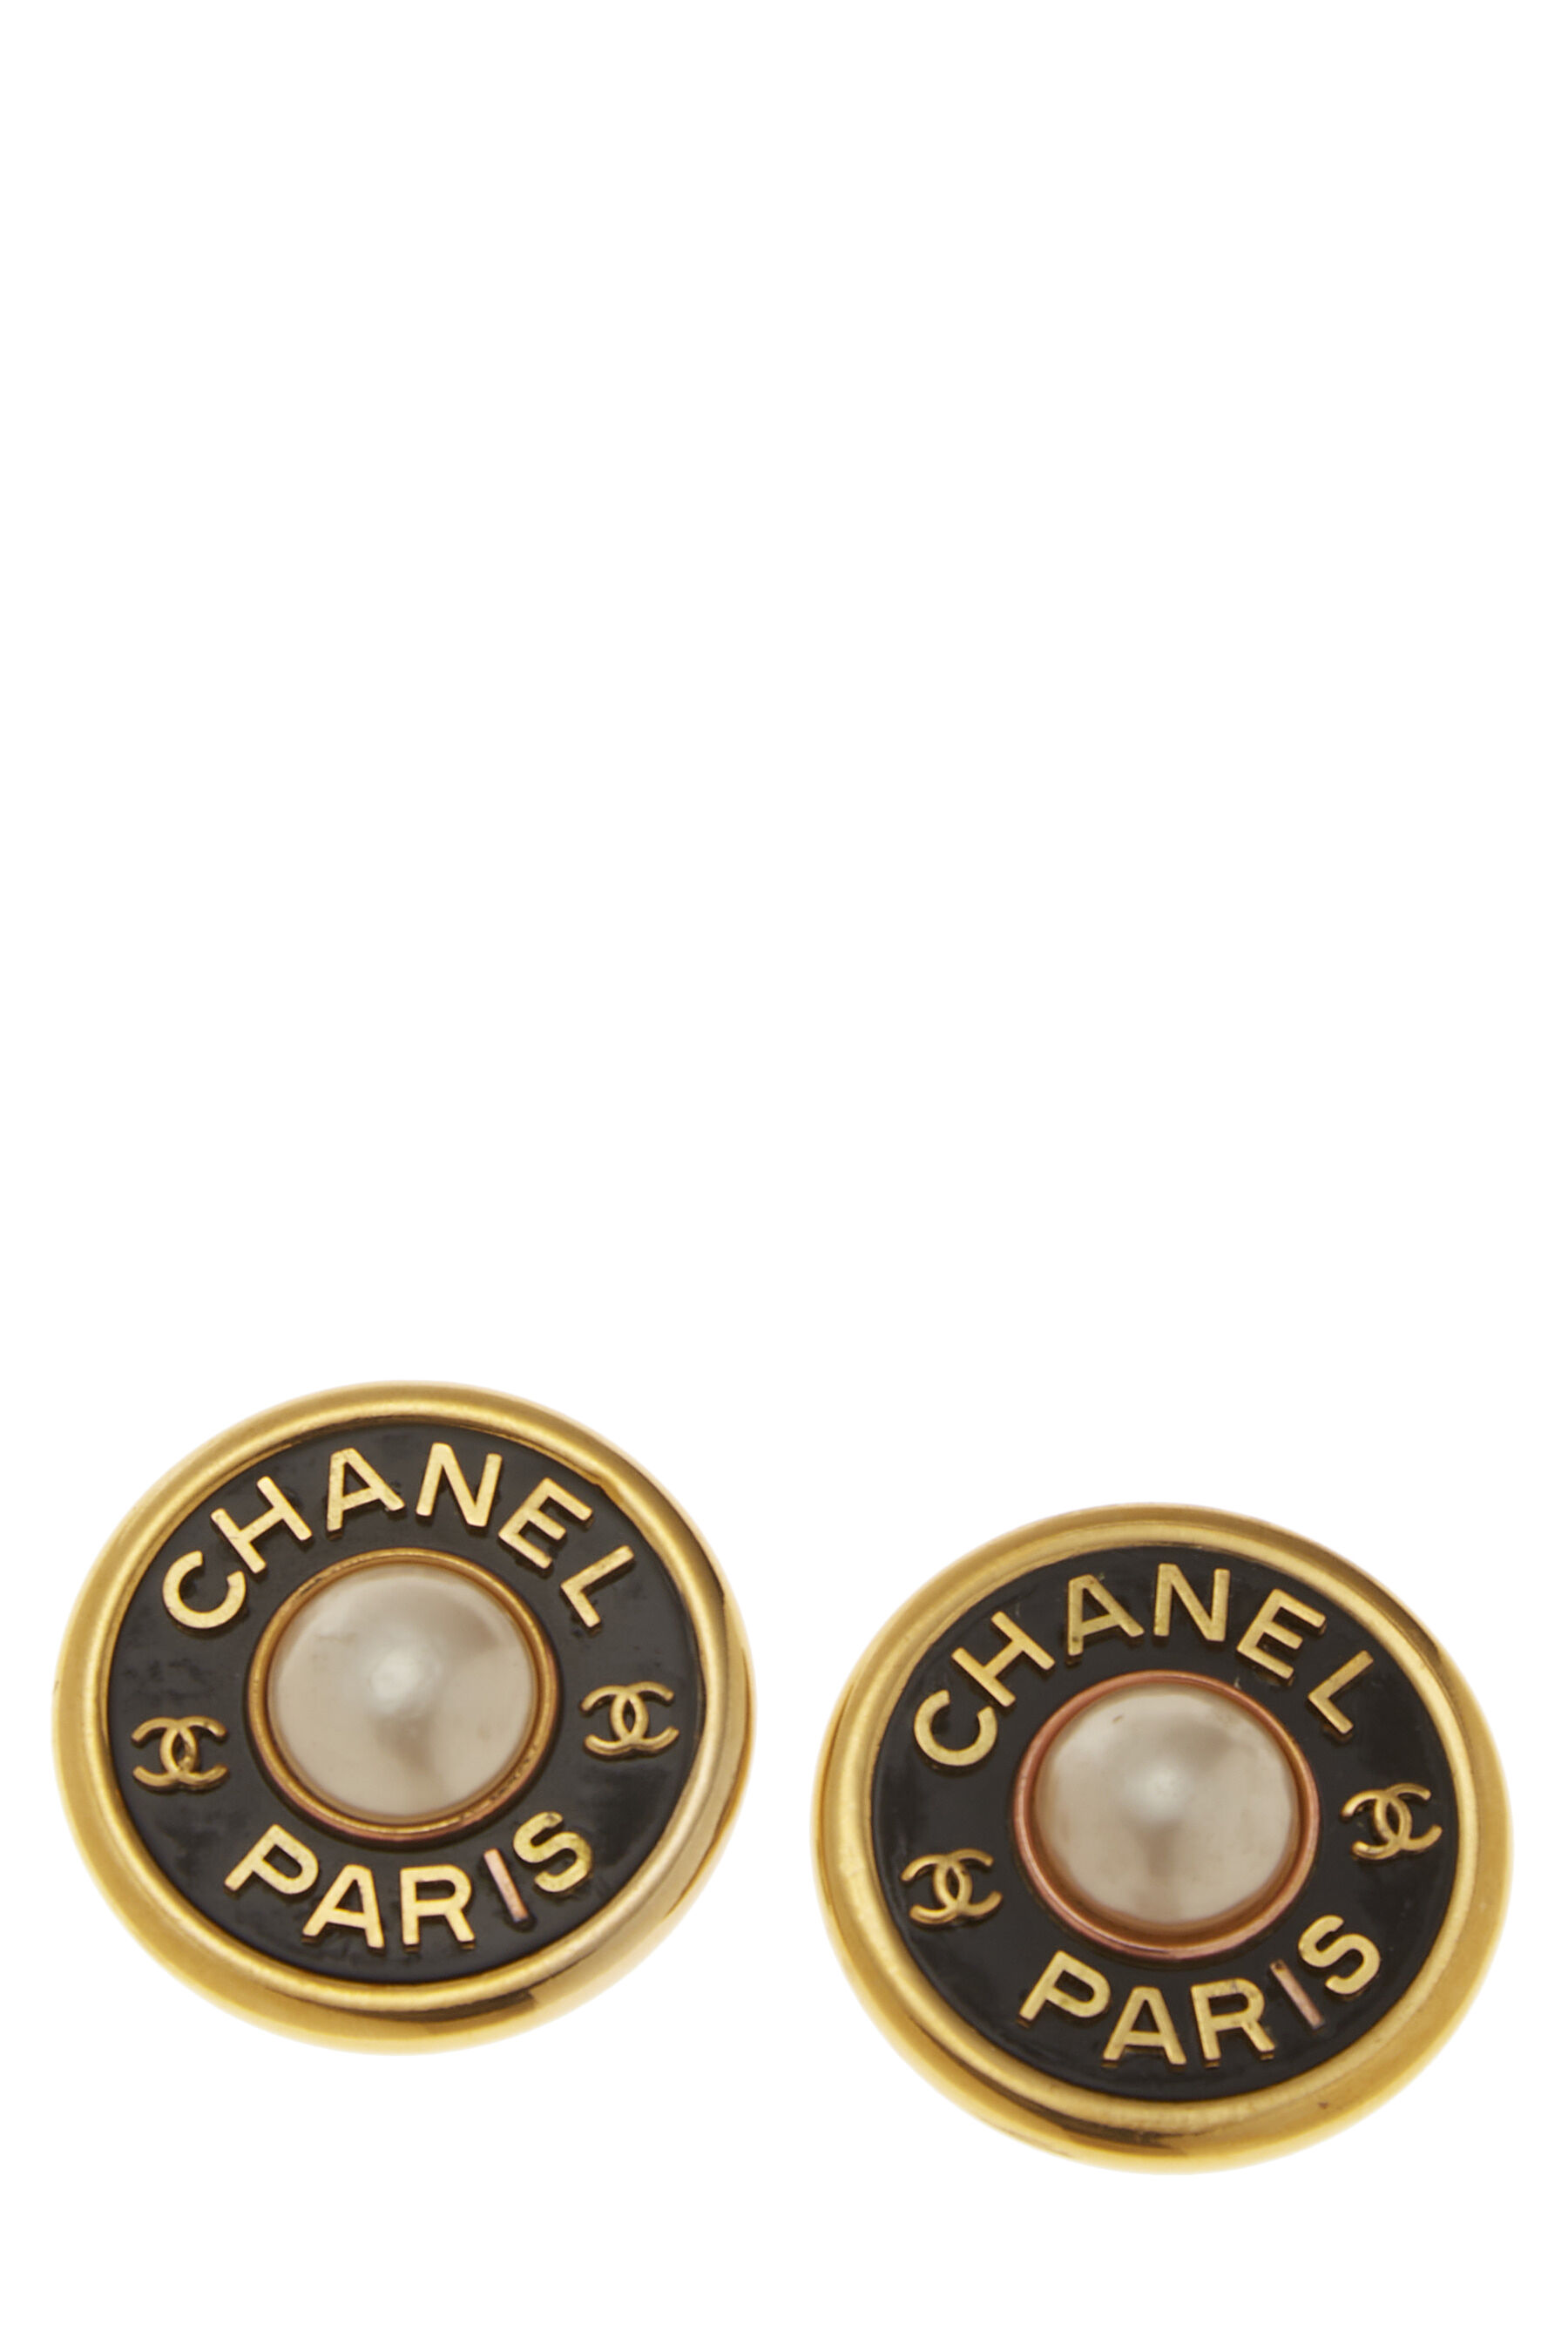 Chanel - Black & Gold Faux Pearl Round Earrings Large